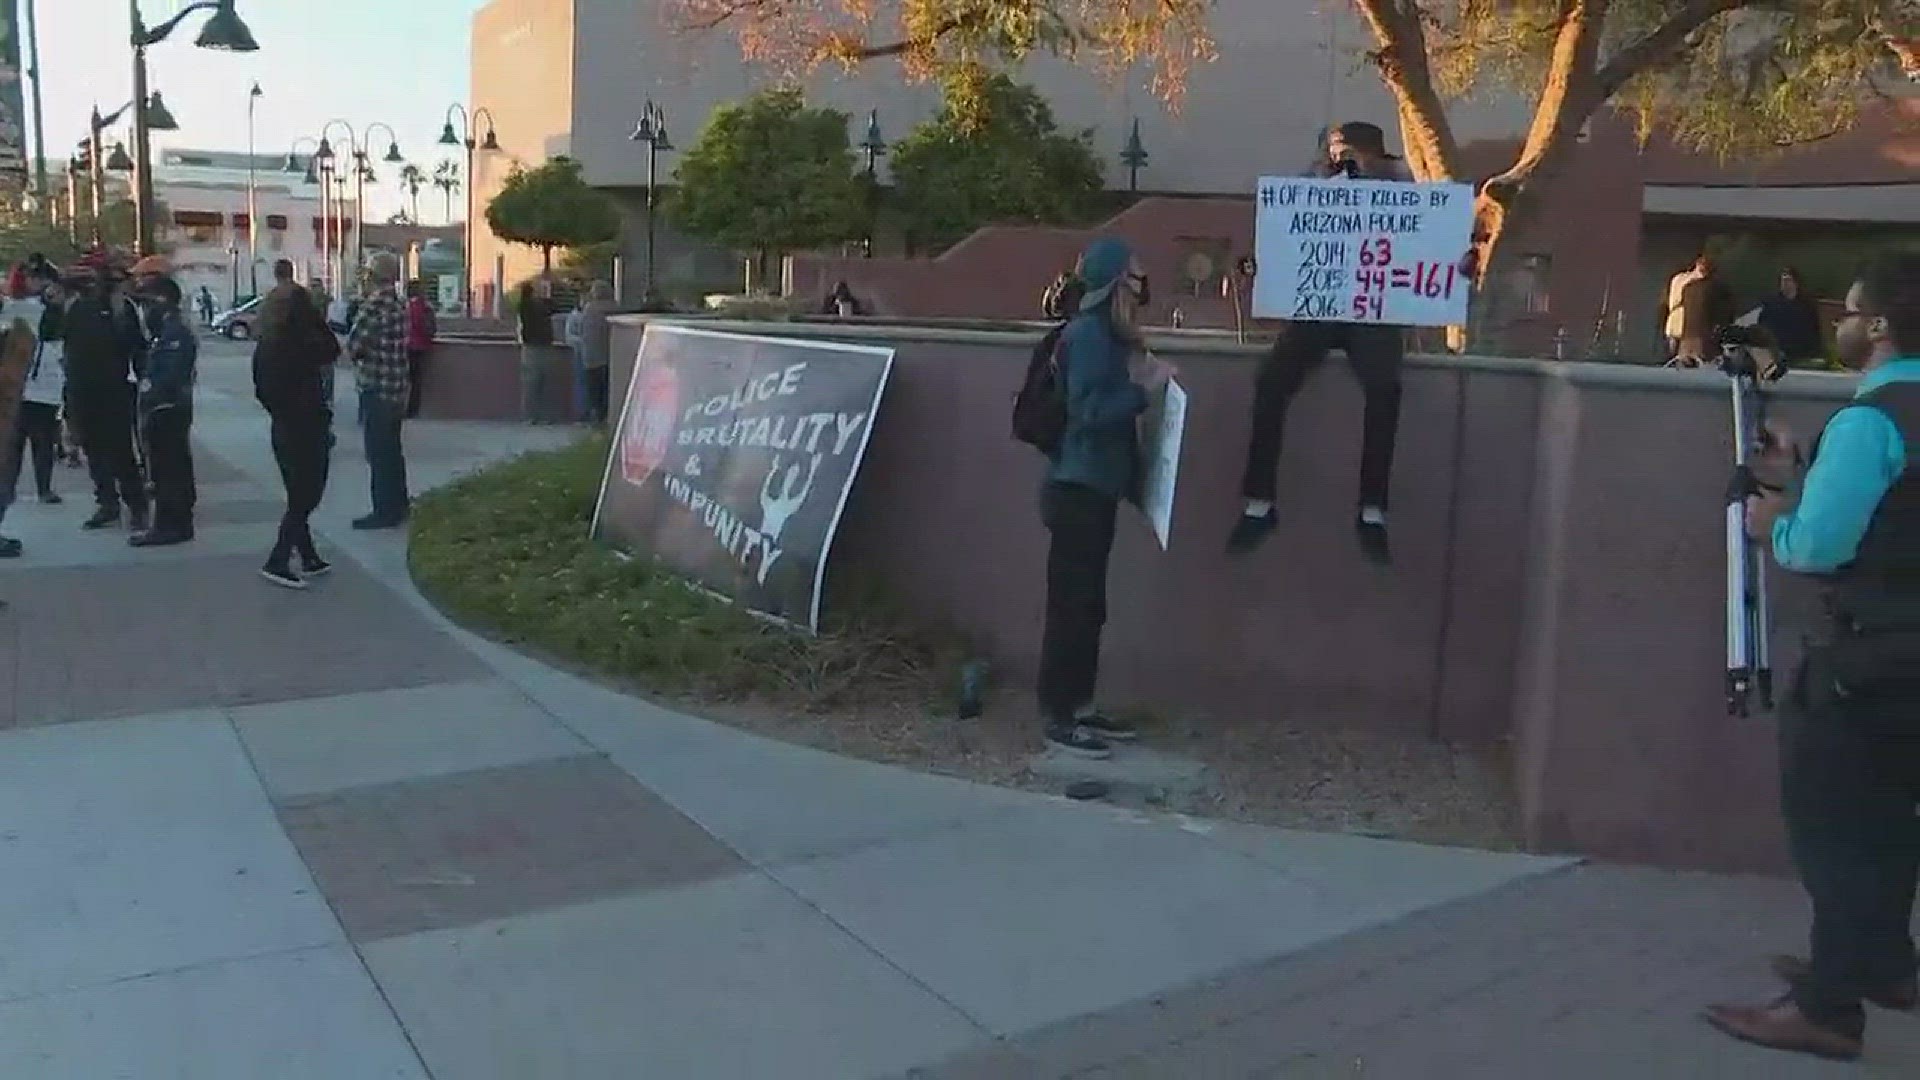 People are holding a "Rally for Justice," in honor of a man killed by a former Mesa police officer.